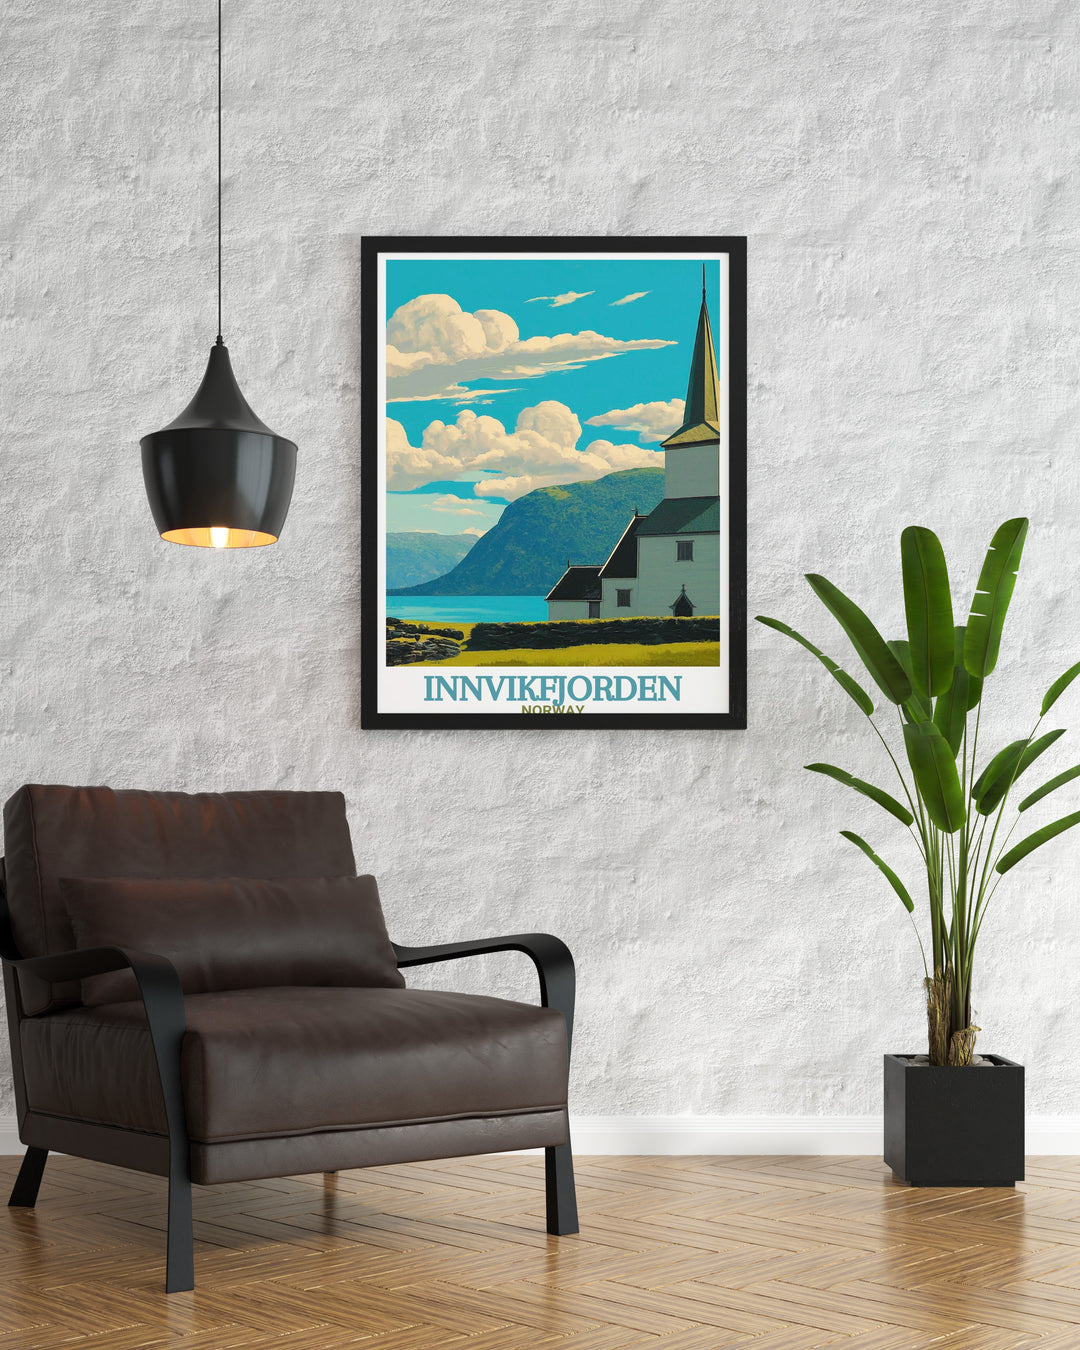 Captivating Innvik Church prints highlighting the majestic fjord cliffs and tranquil waters of Innvikfjorden Norway perfect for art lovers